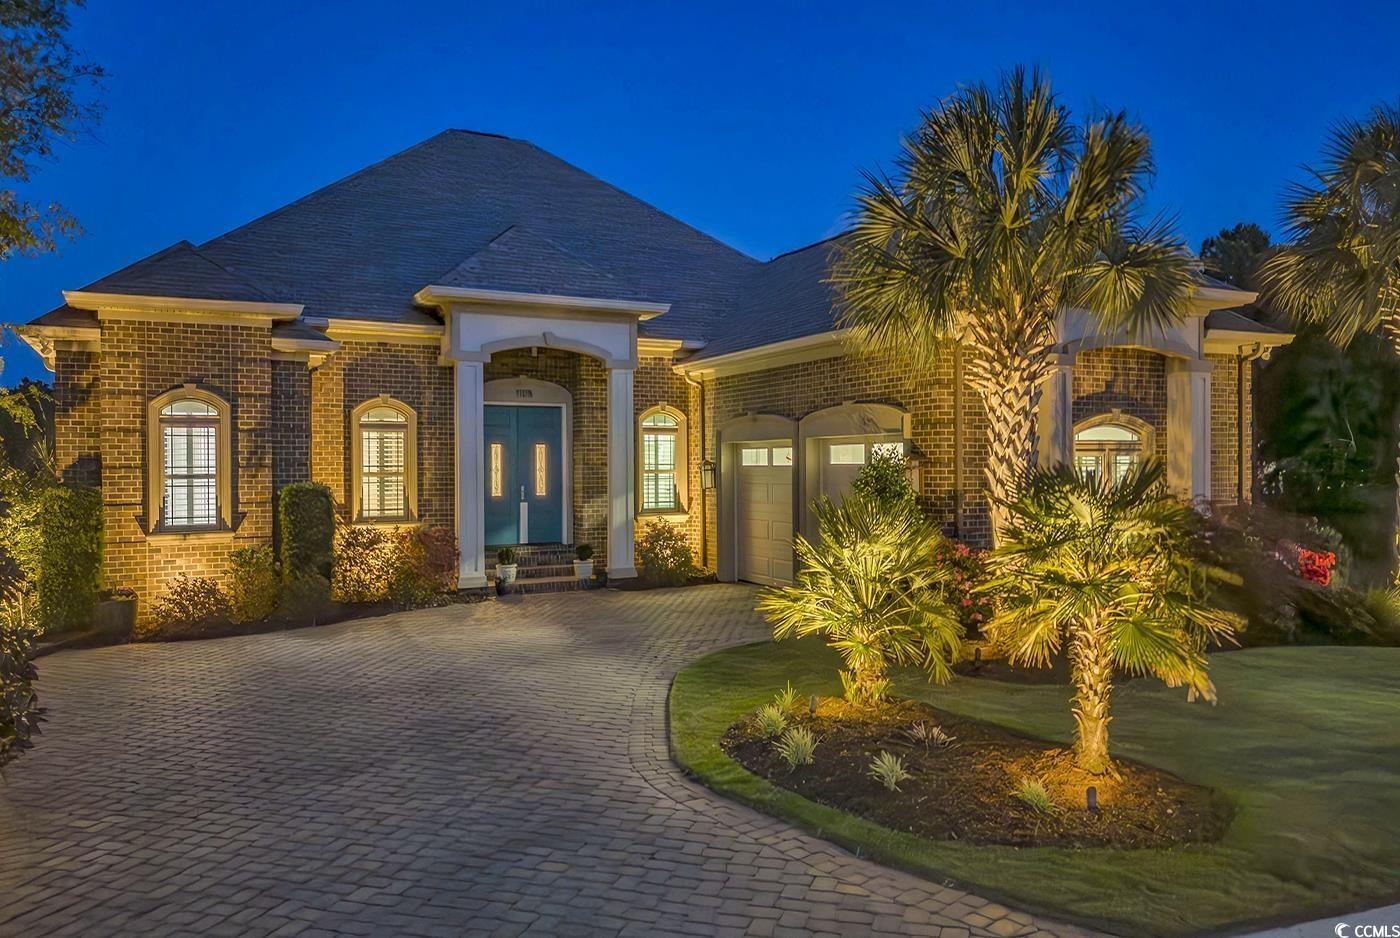 Property Image for 1108 Surf Pointe Dr.